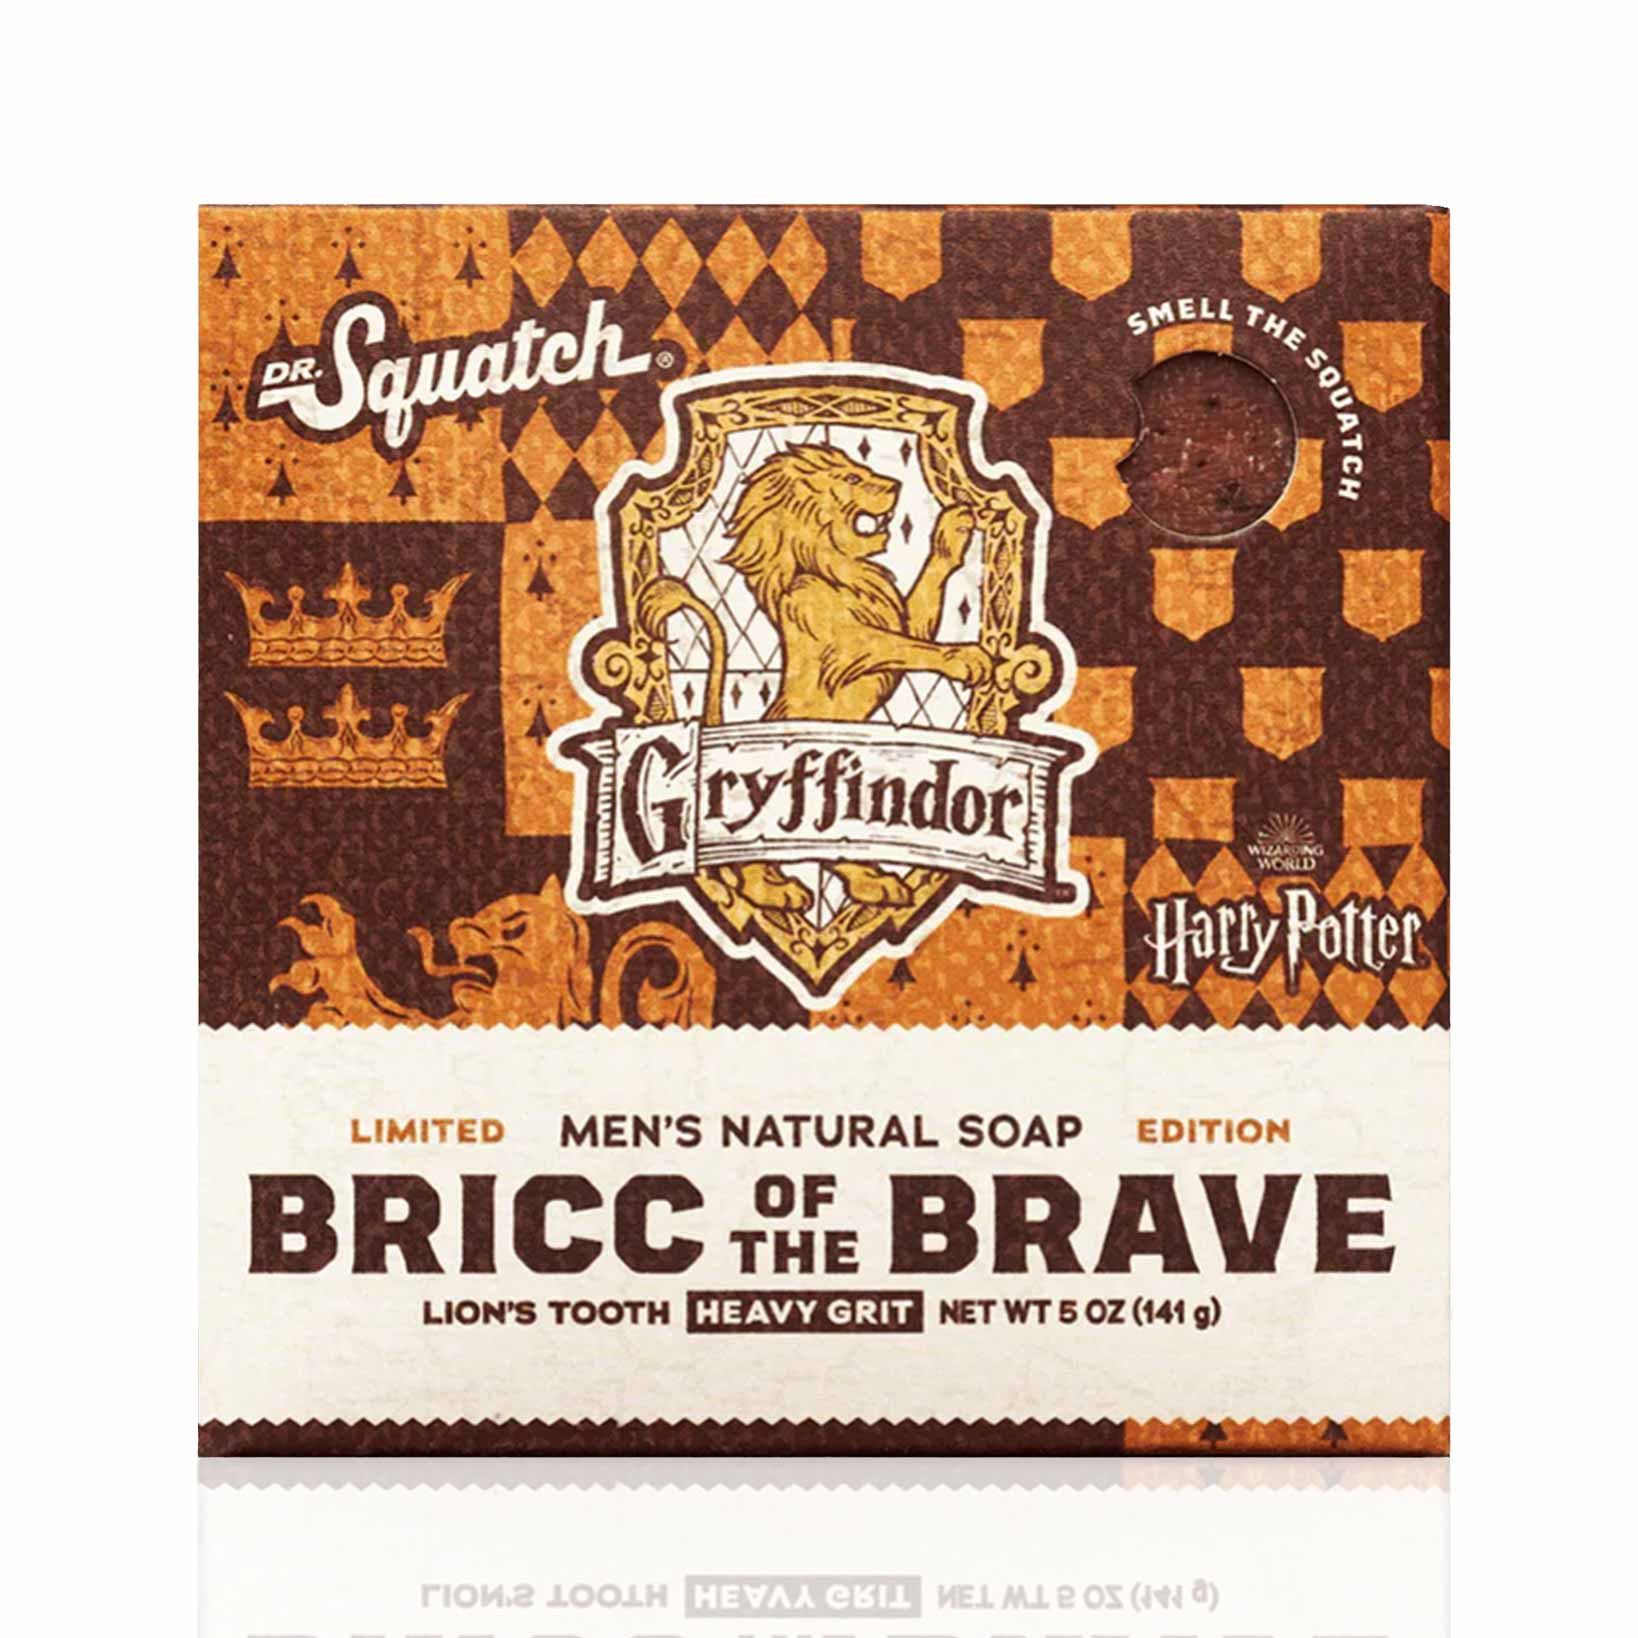  Dr. Squatch All Natural Bar Soap for Men with Heavy Grit, King  of the Briccs Jurassic Park : Beauty & Personal Care